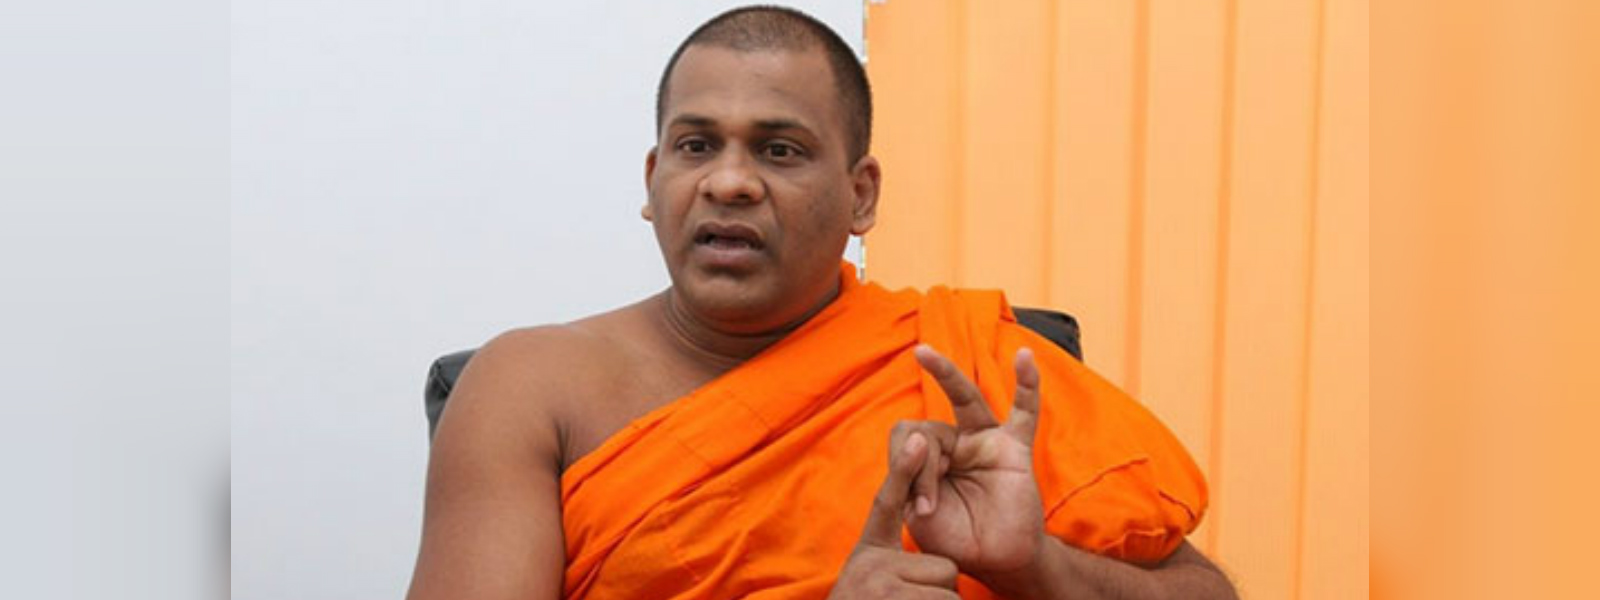 Ven. Gnanasara Thero tipped to enter Parliament through national list